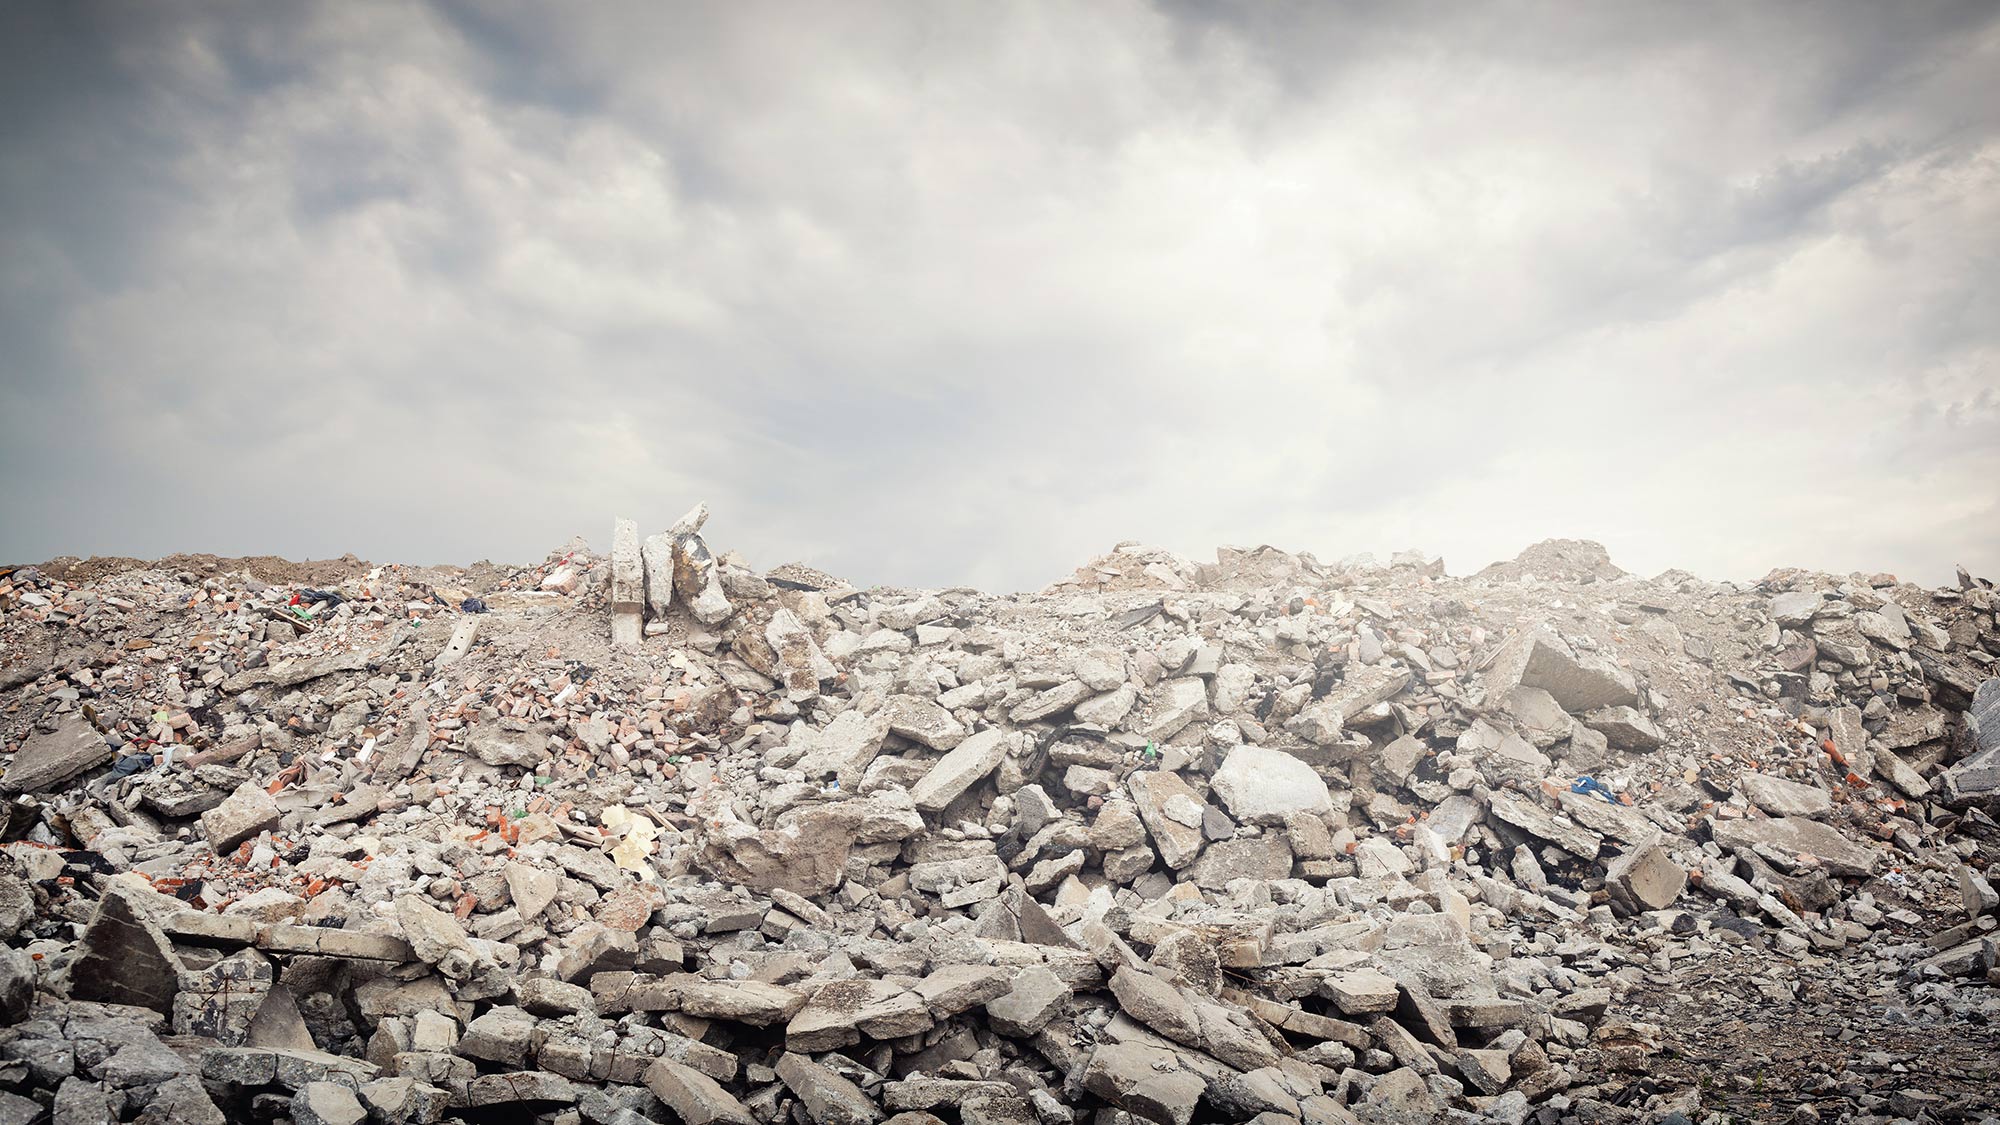  Construction and Demolition Waste: An Overview of Australia's Growing Problem